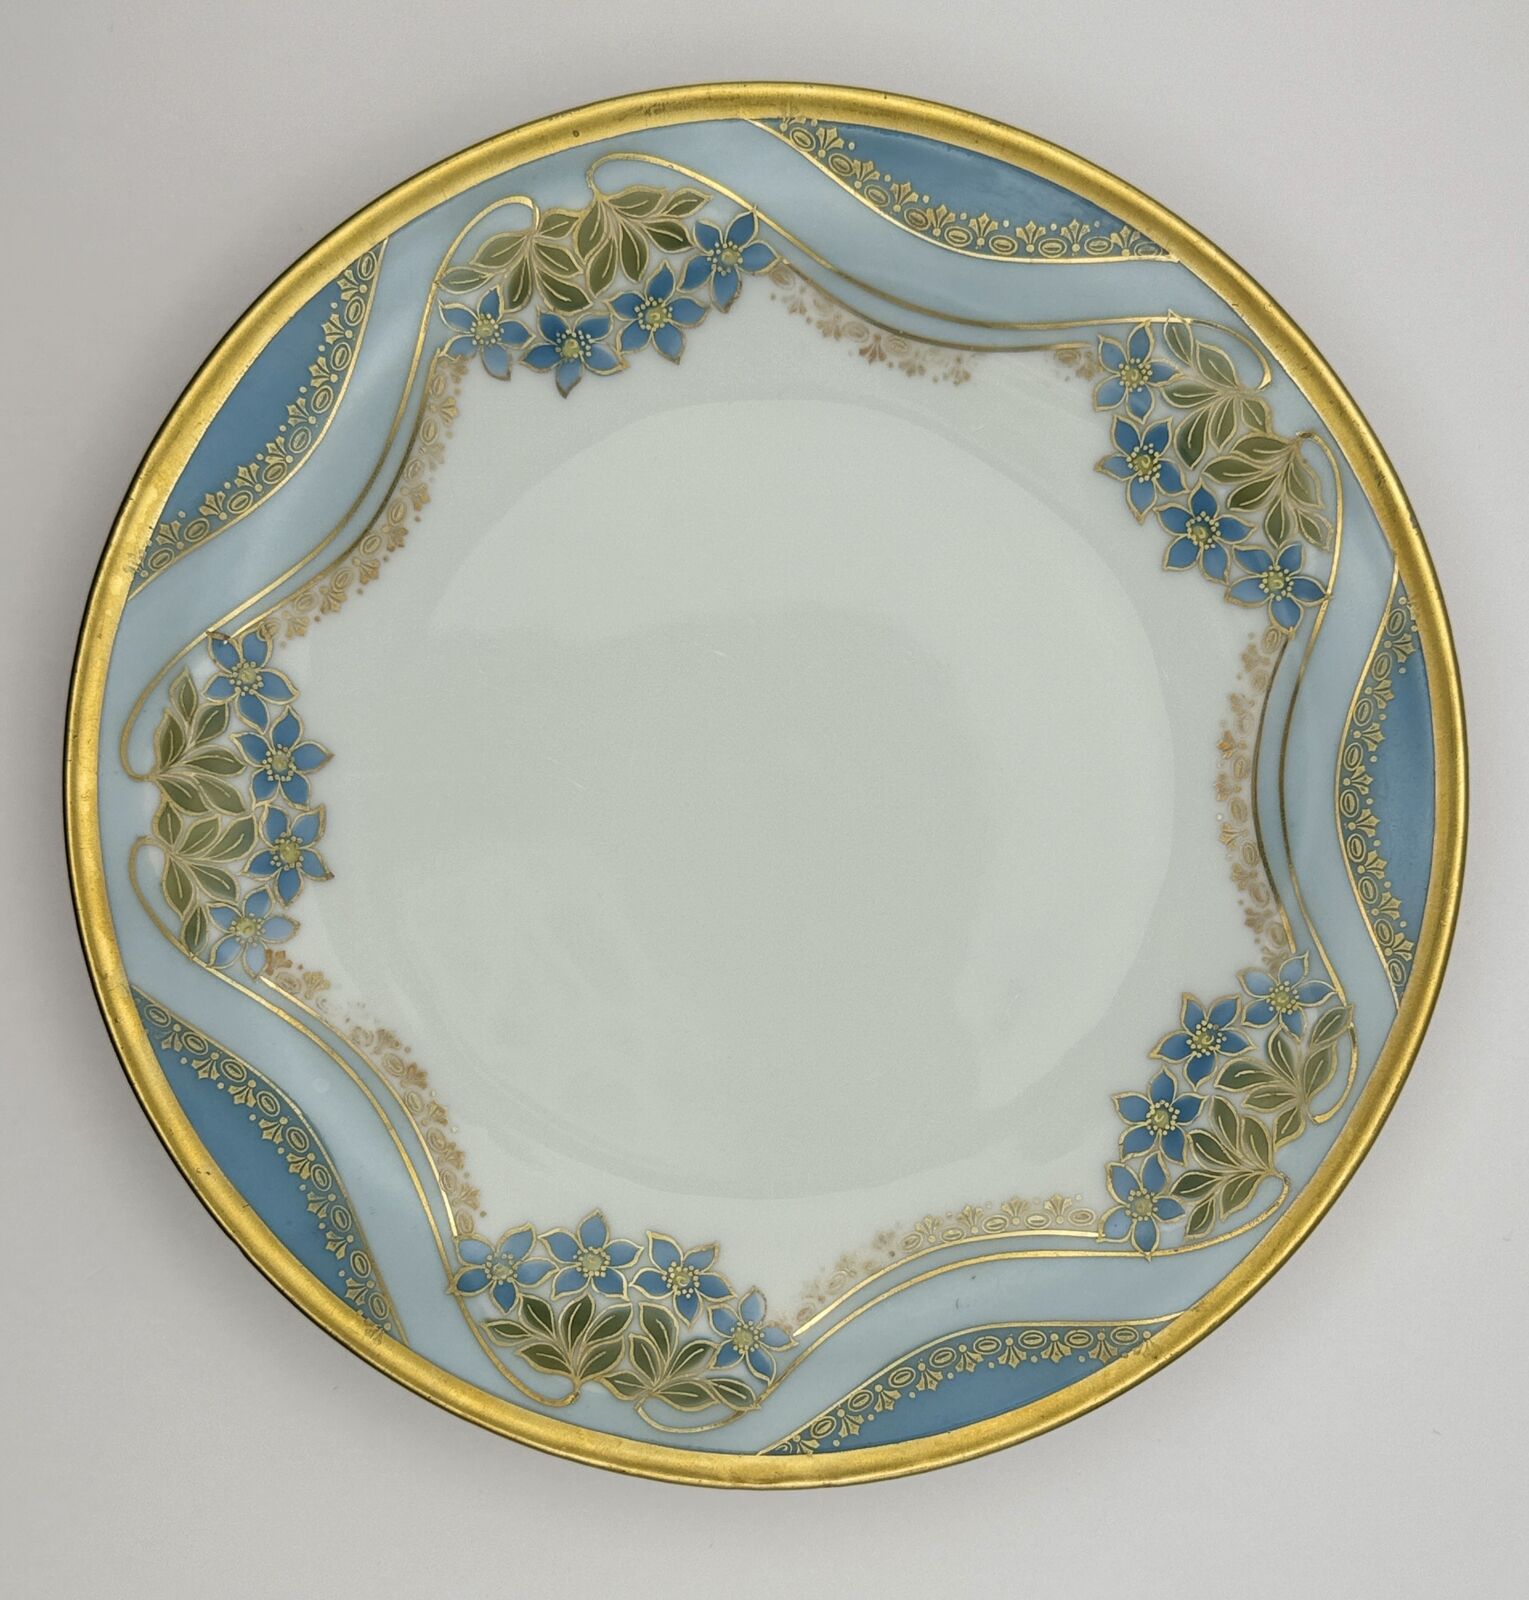 Gorgeous Antique RS Germany - Blue, White & Gold Hand-Painted Porcelain Plate